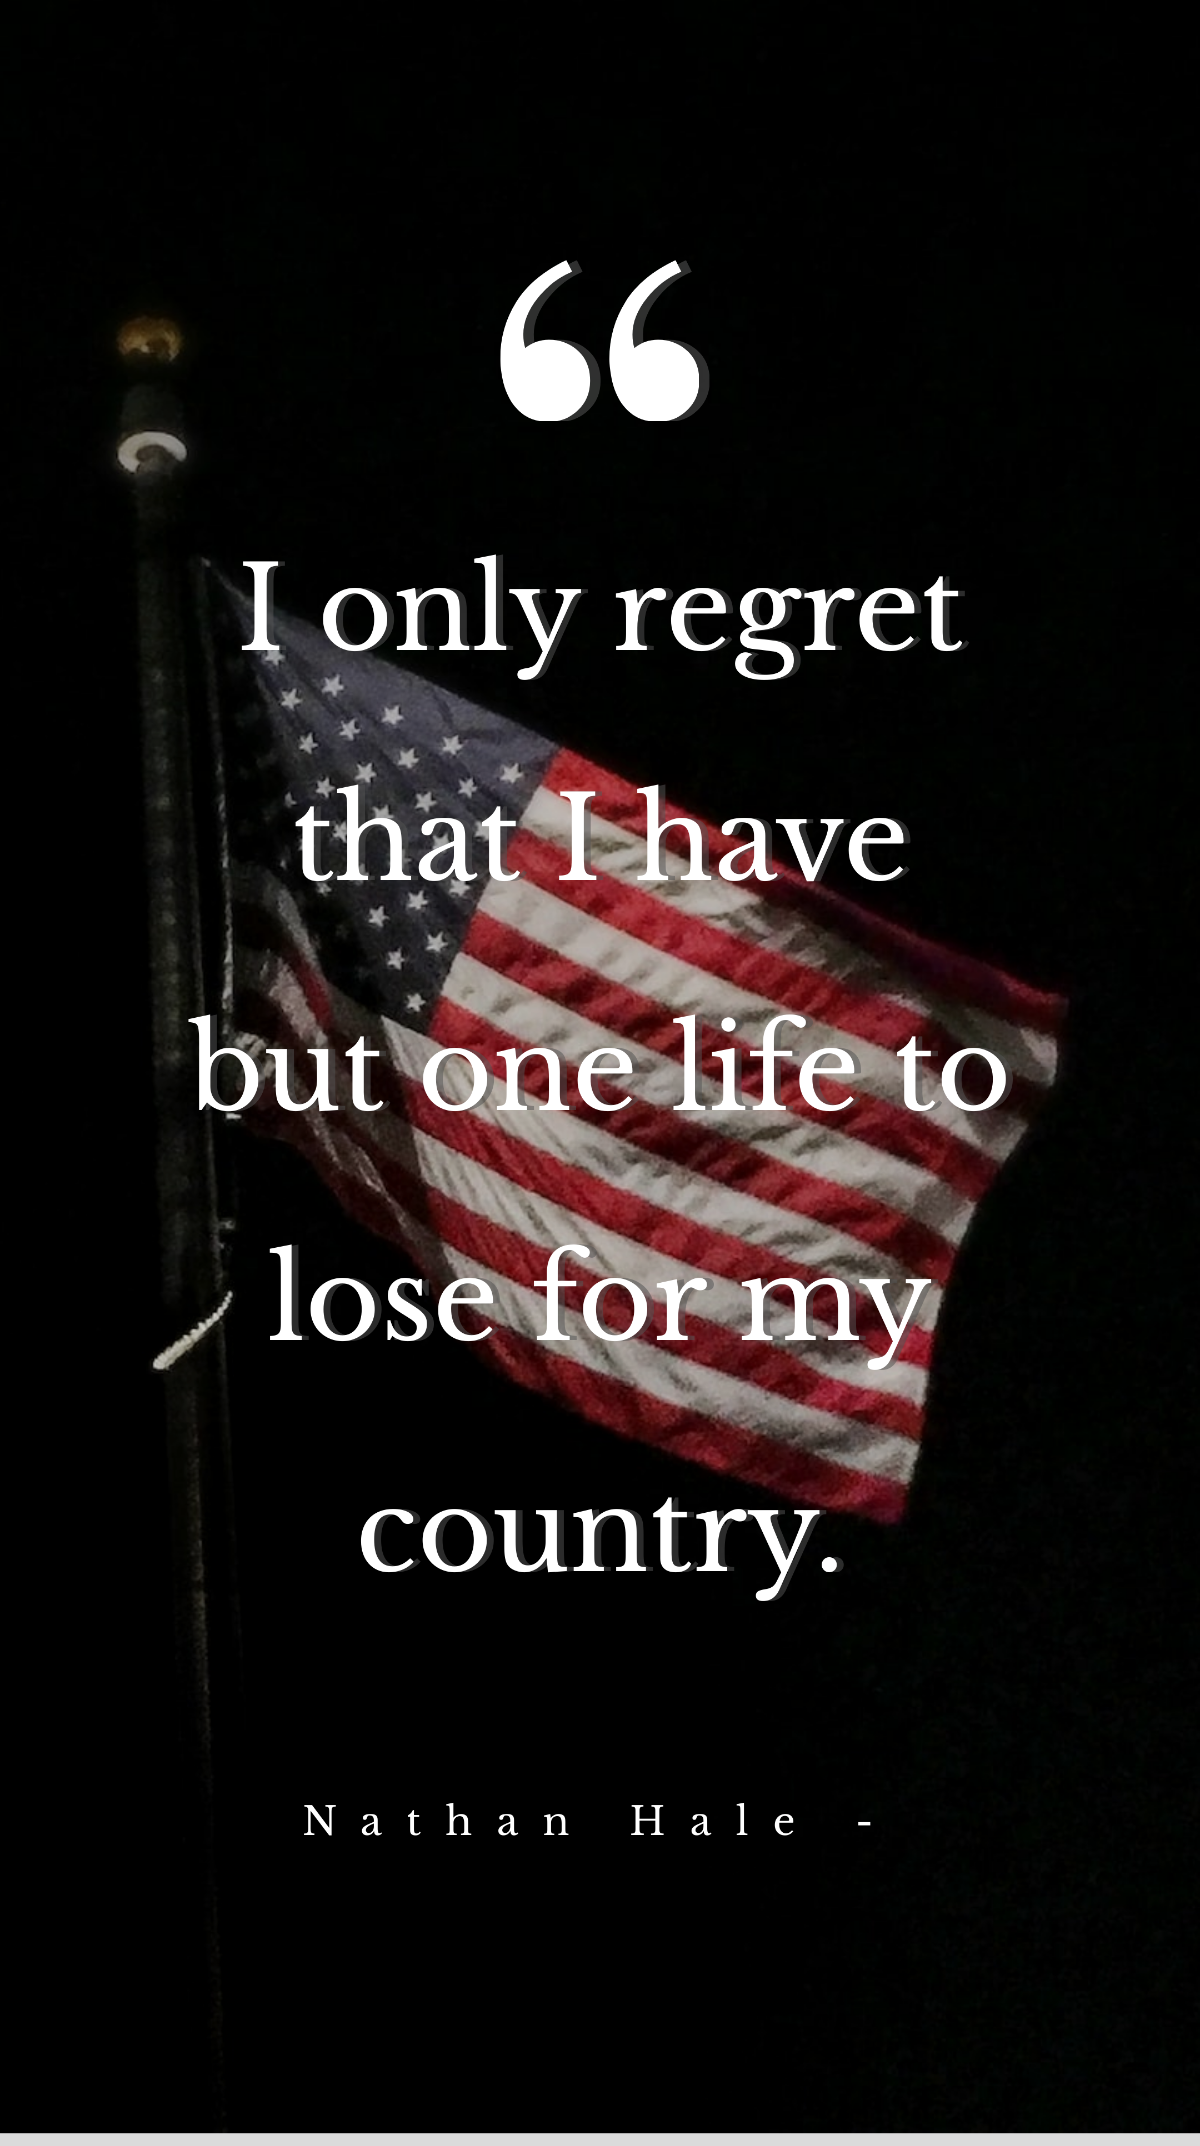 Nathan Hale - I only regret that I have but one life to lose for my country. Template